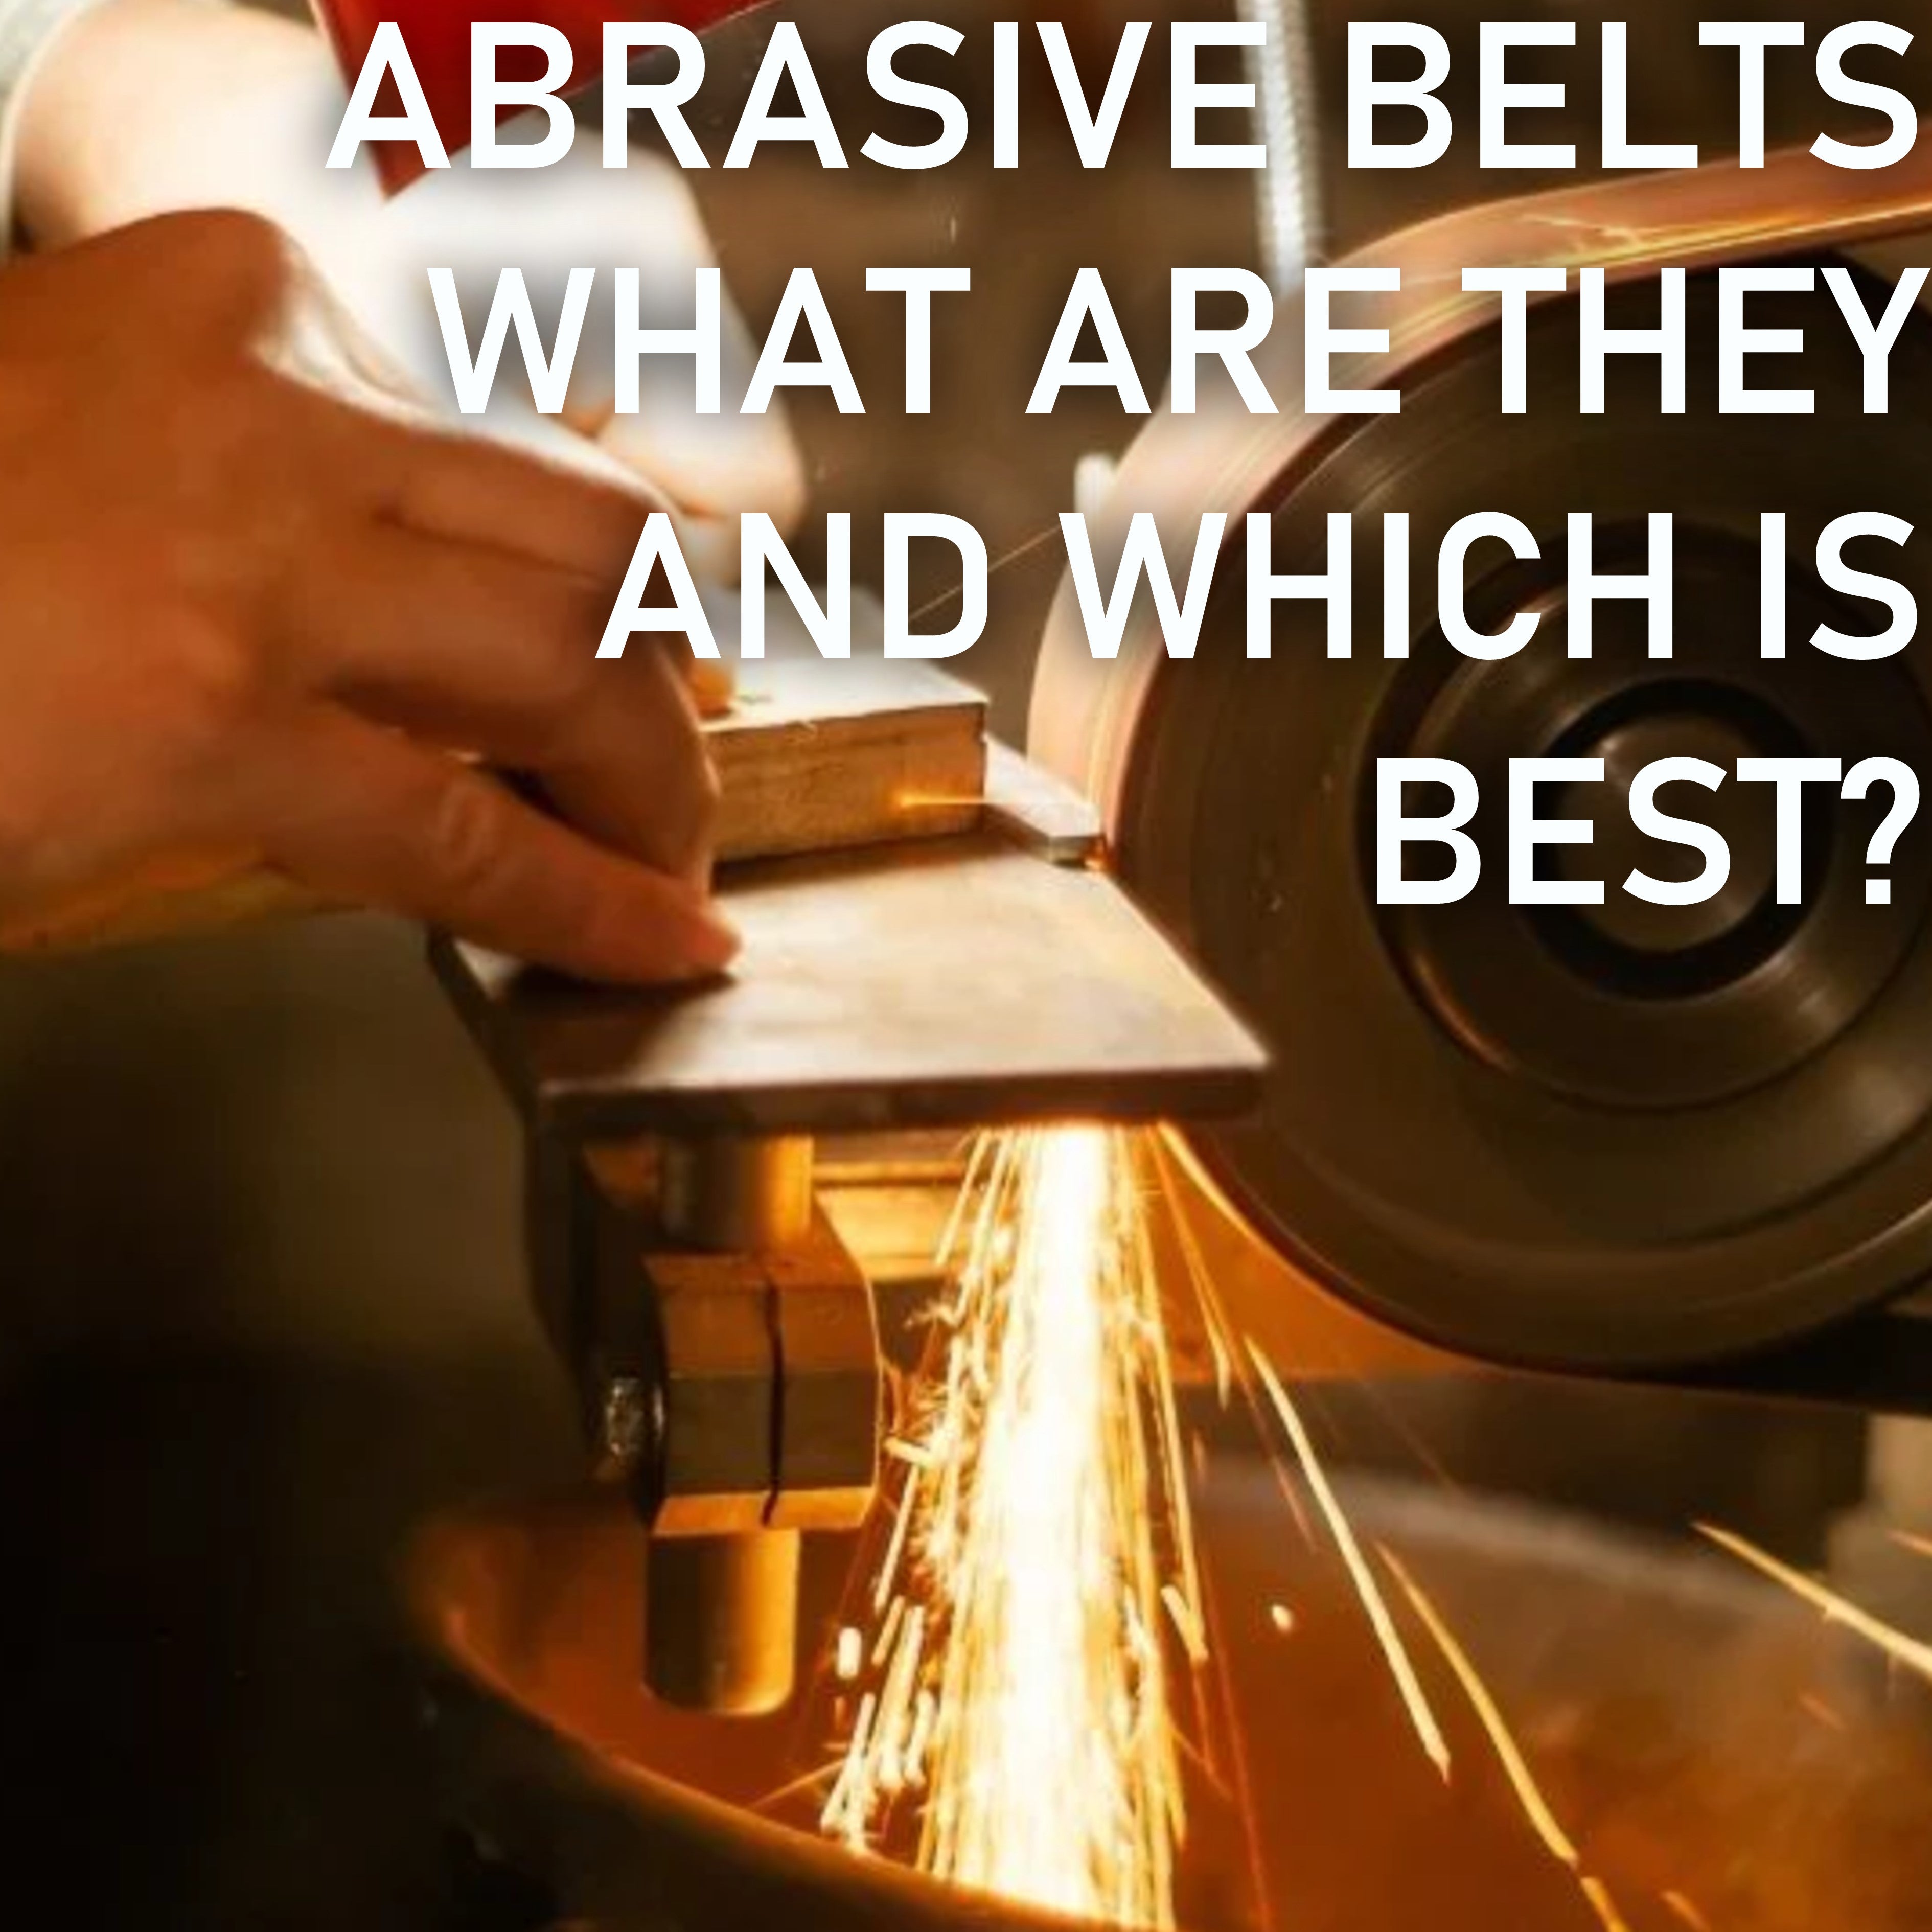 Abrasive belts, what are they and which is the best?